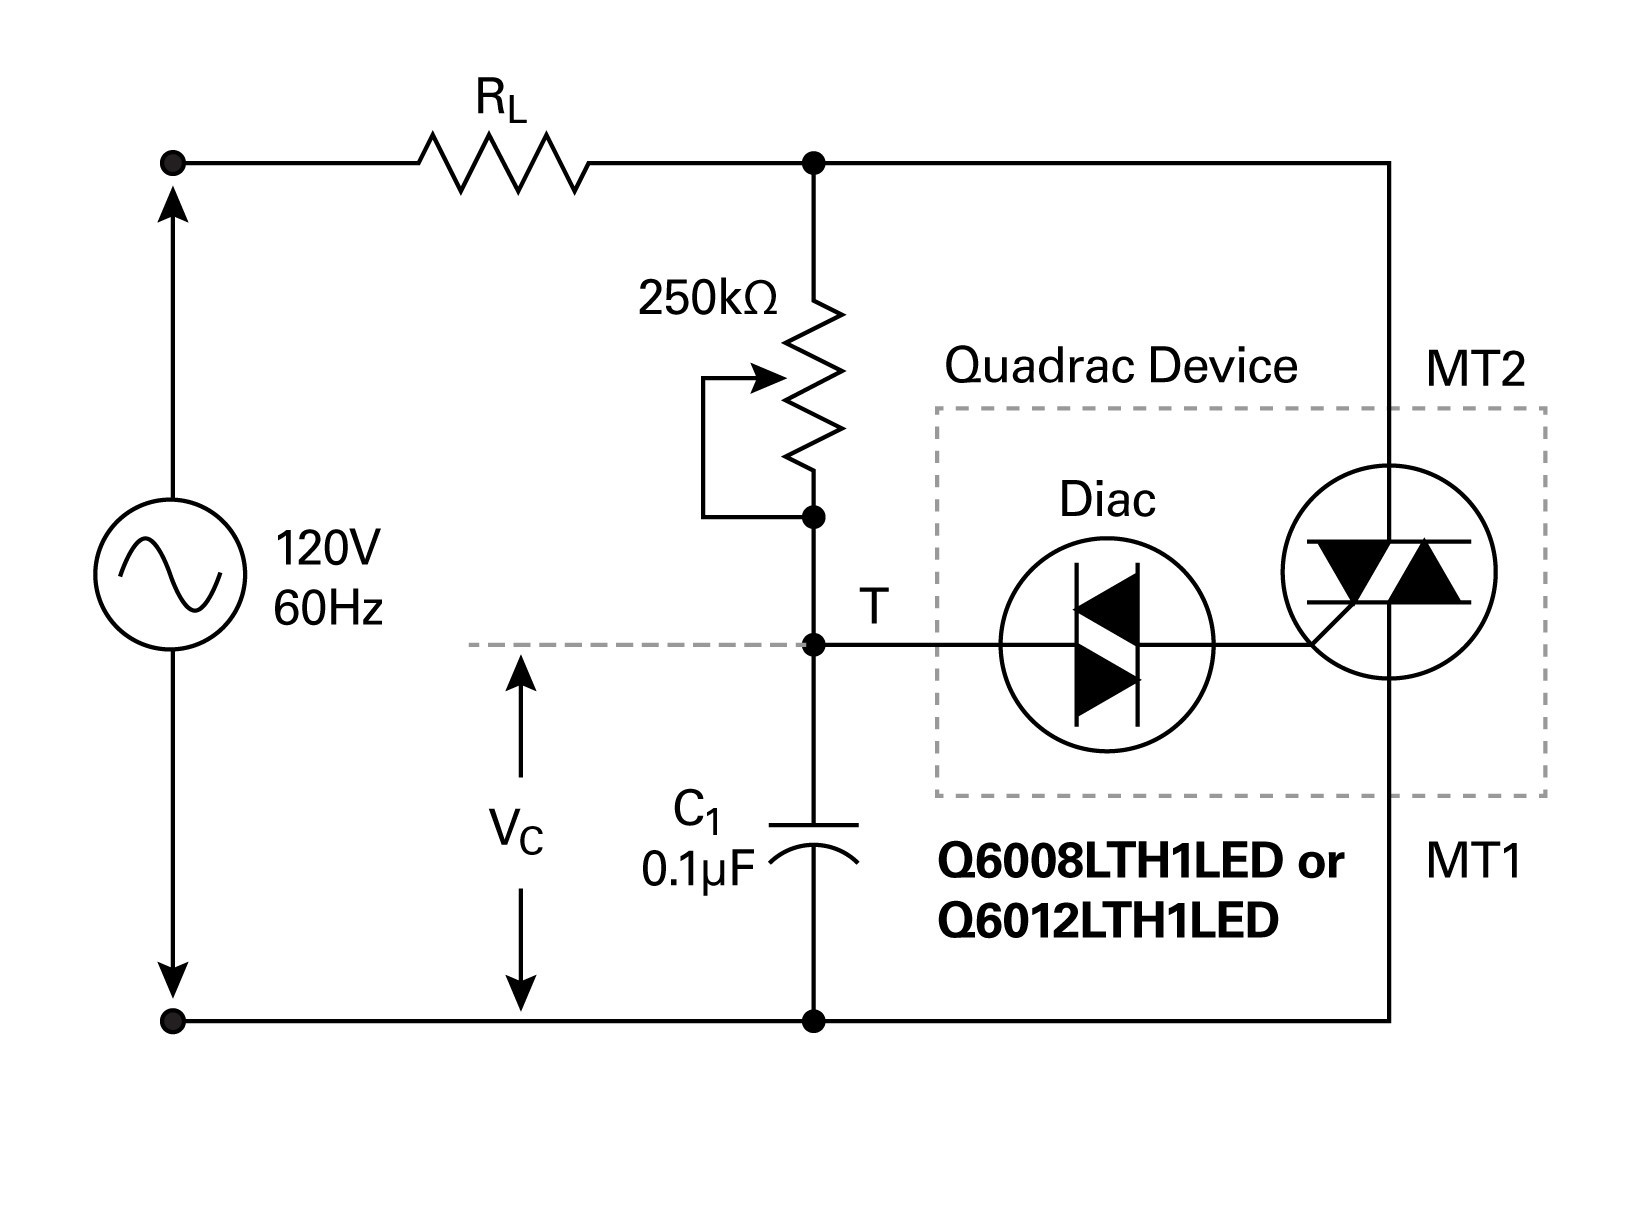 Simplifying Solid State Lighting Control In This Quadrac Based Dimming Circuit The Potentiometer Is With Built